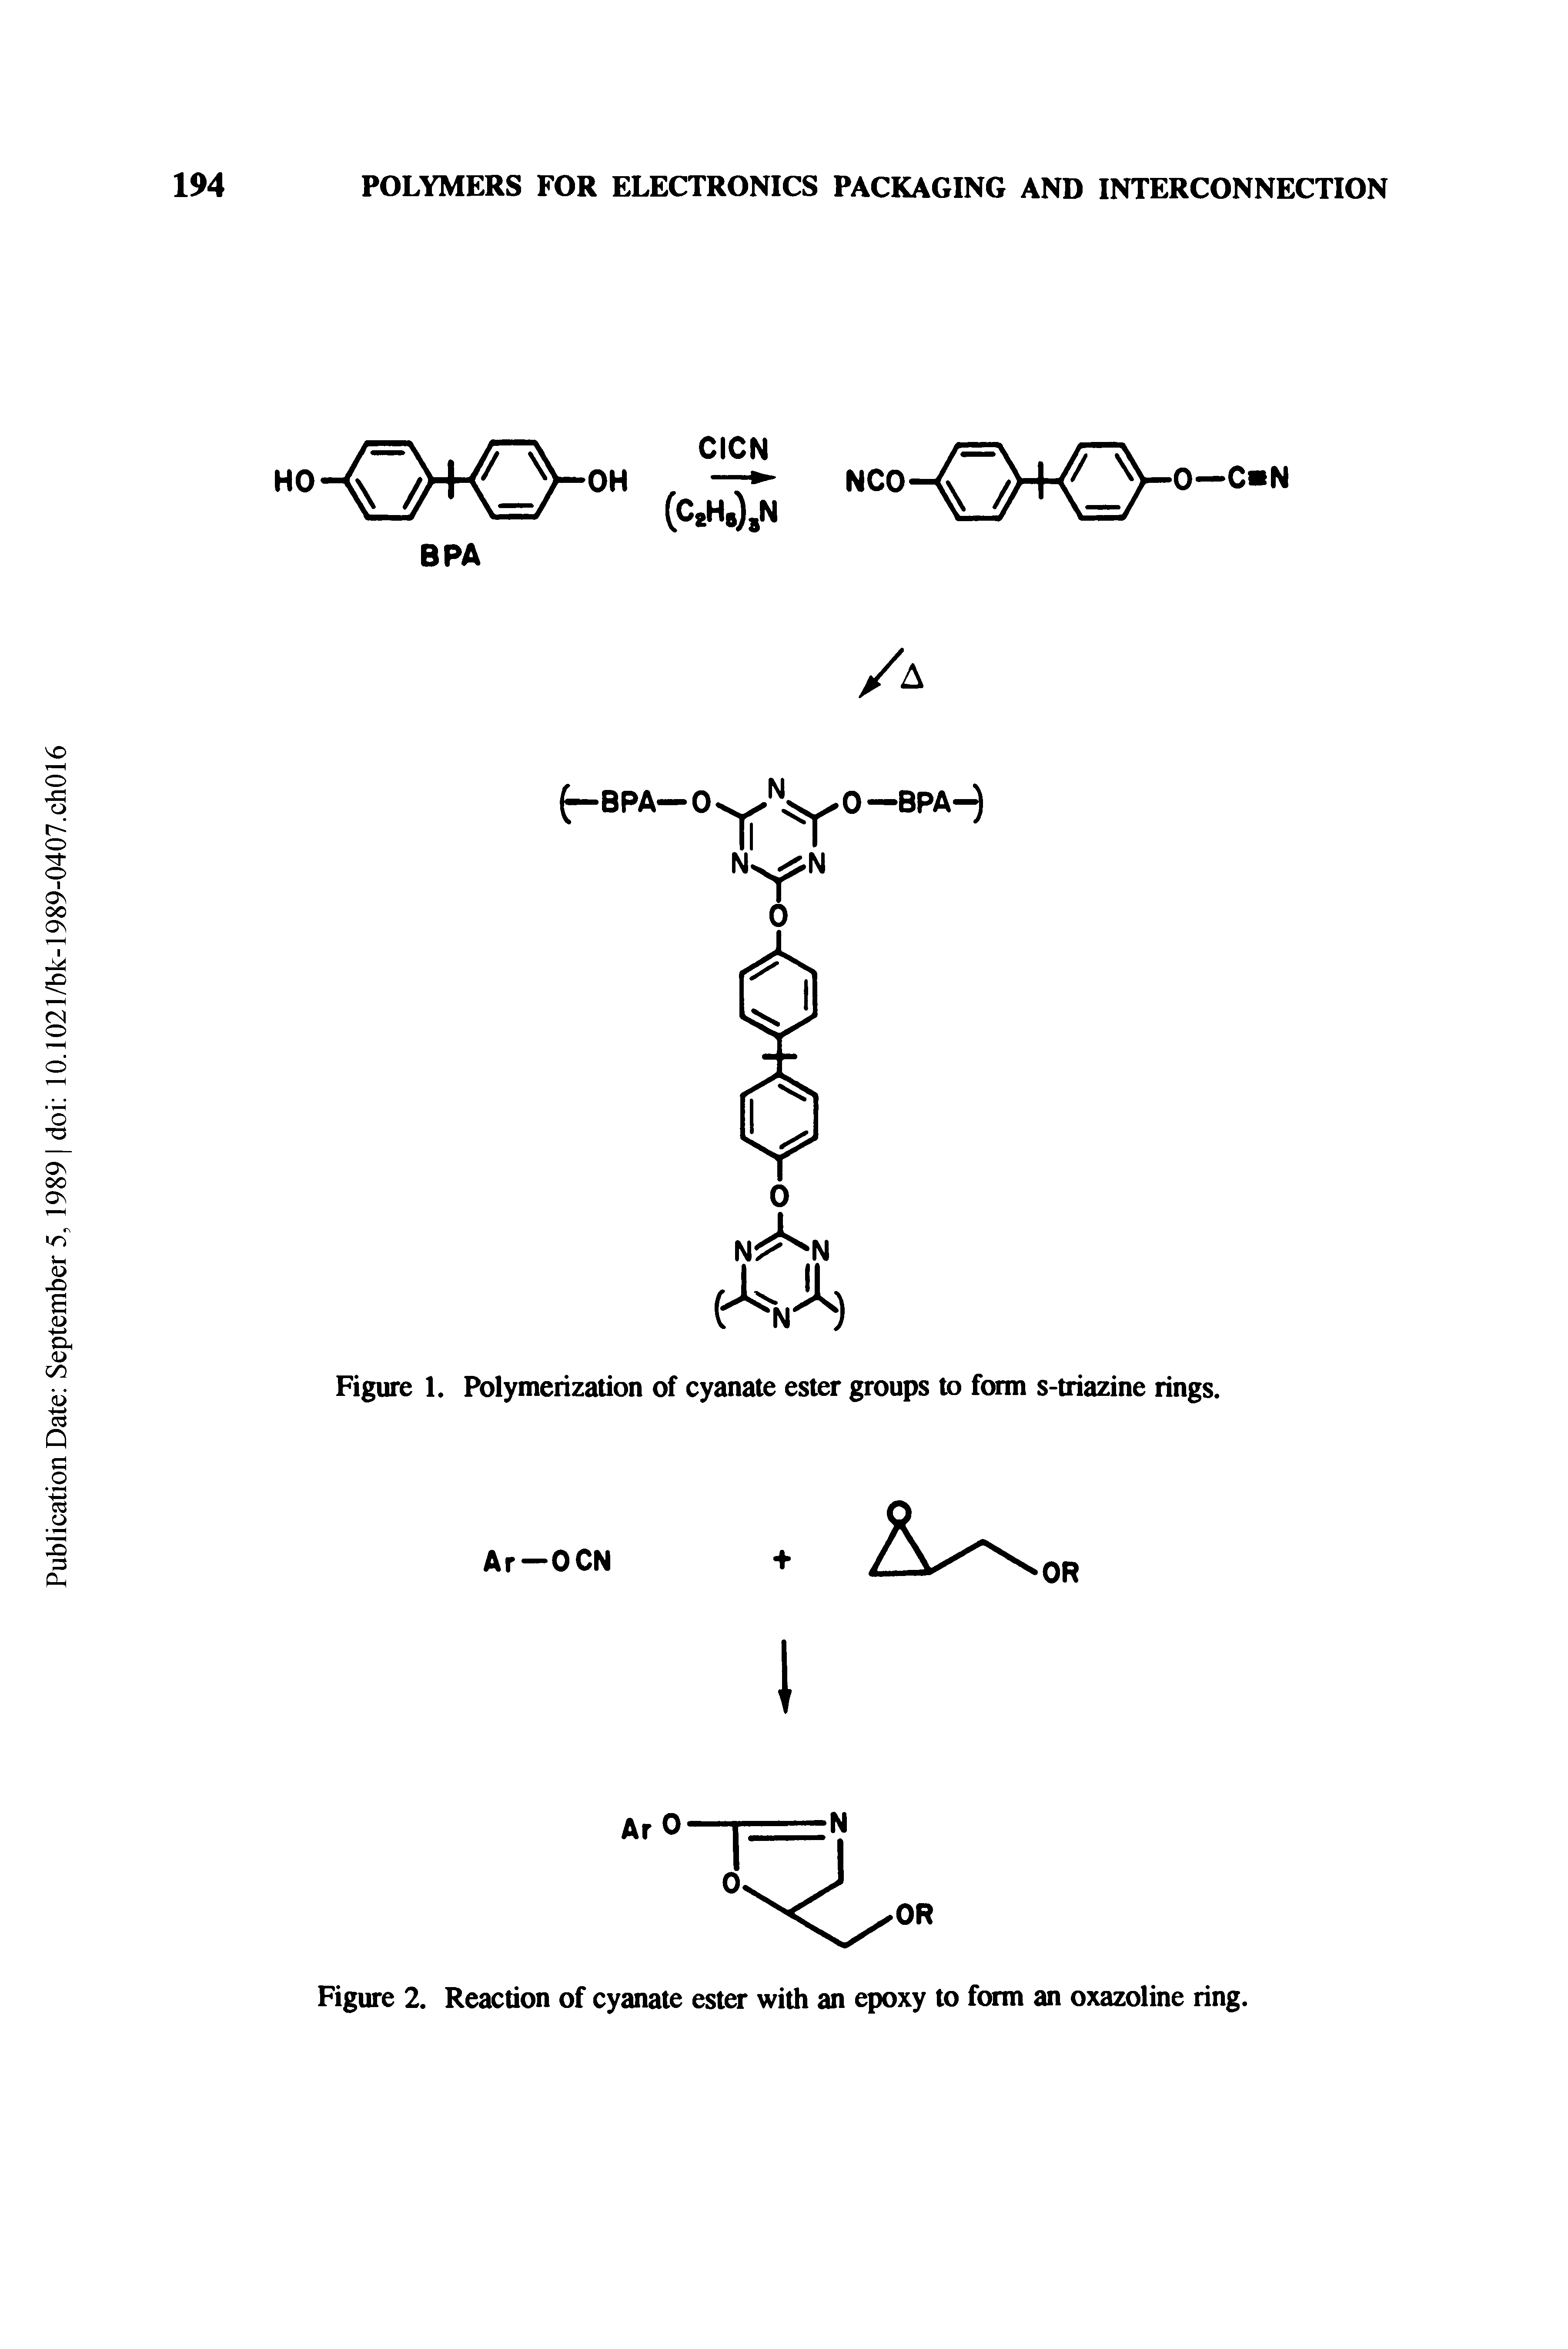 Figure 2. Reaction of cyanate ester with an epoxy to form an oxazoline ring.